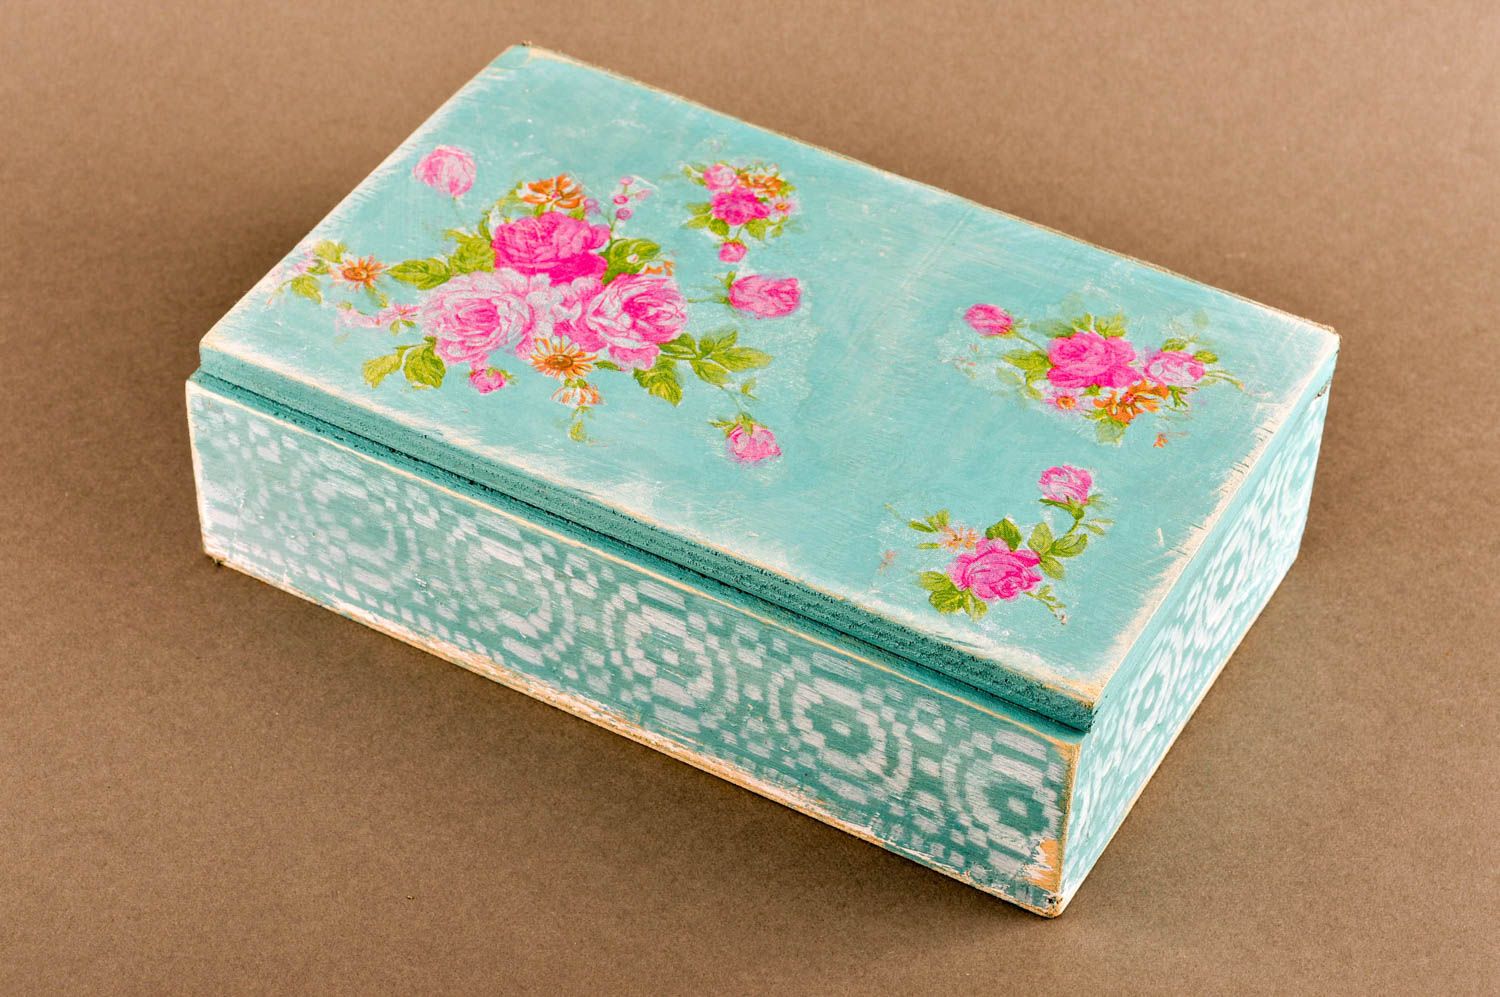 Beautiful handmade wooden box design floral jewelry box best gifts for her photo 1